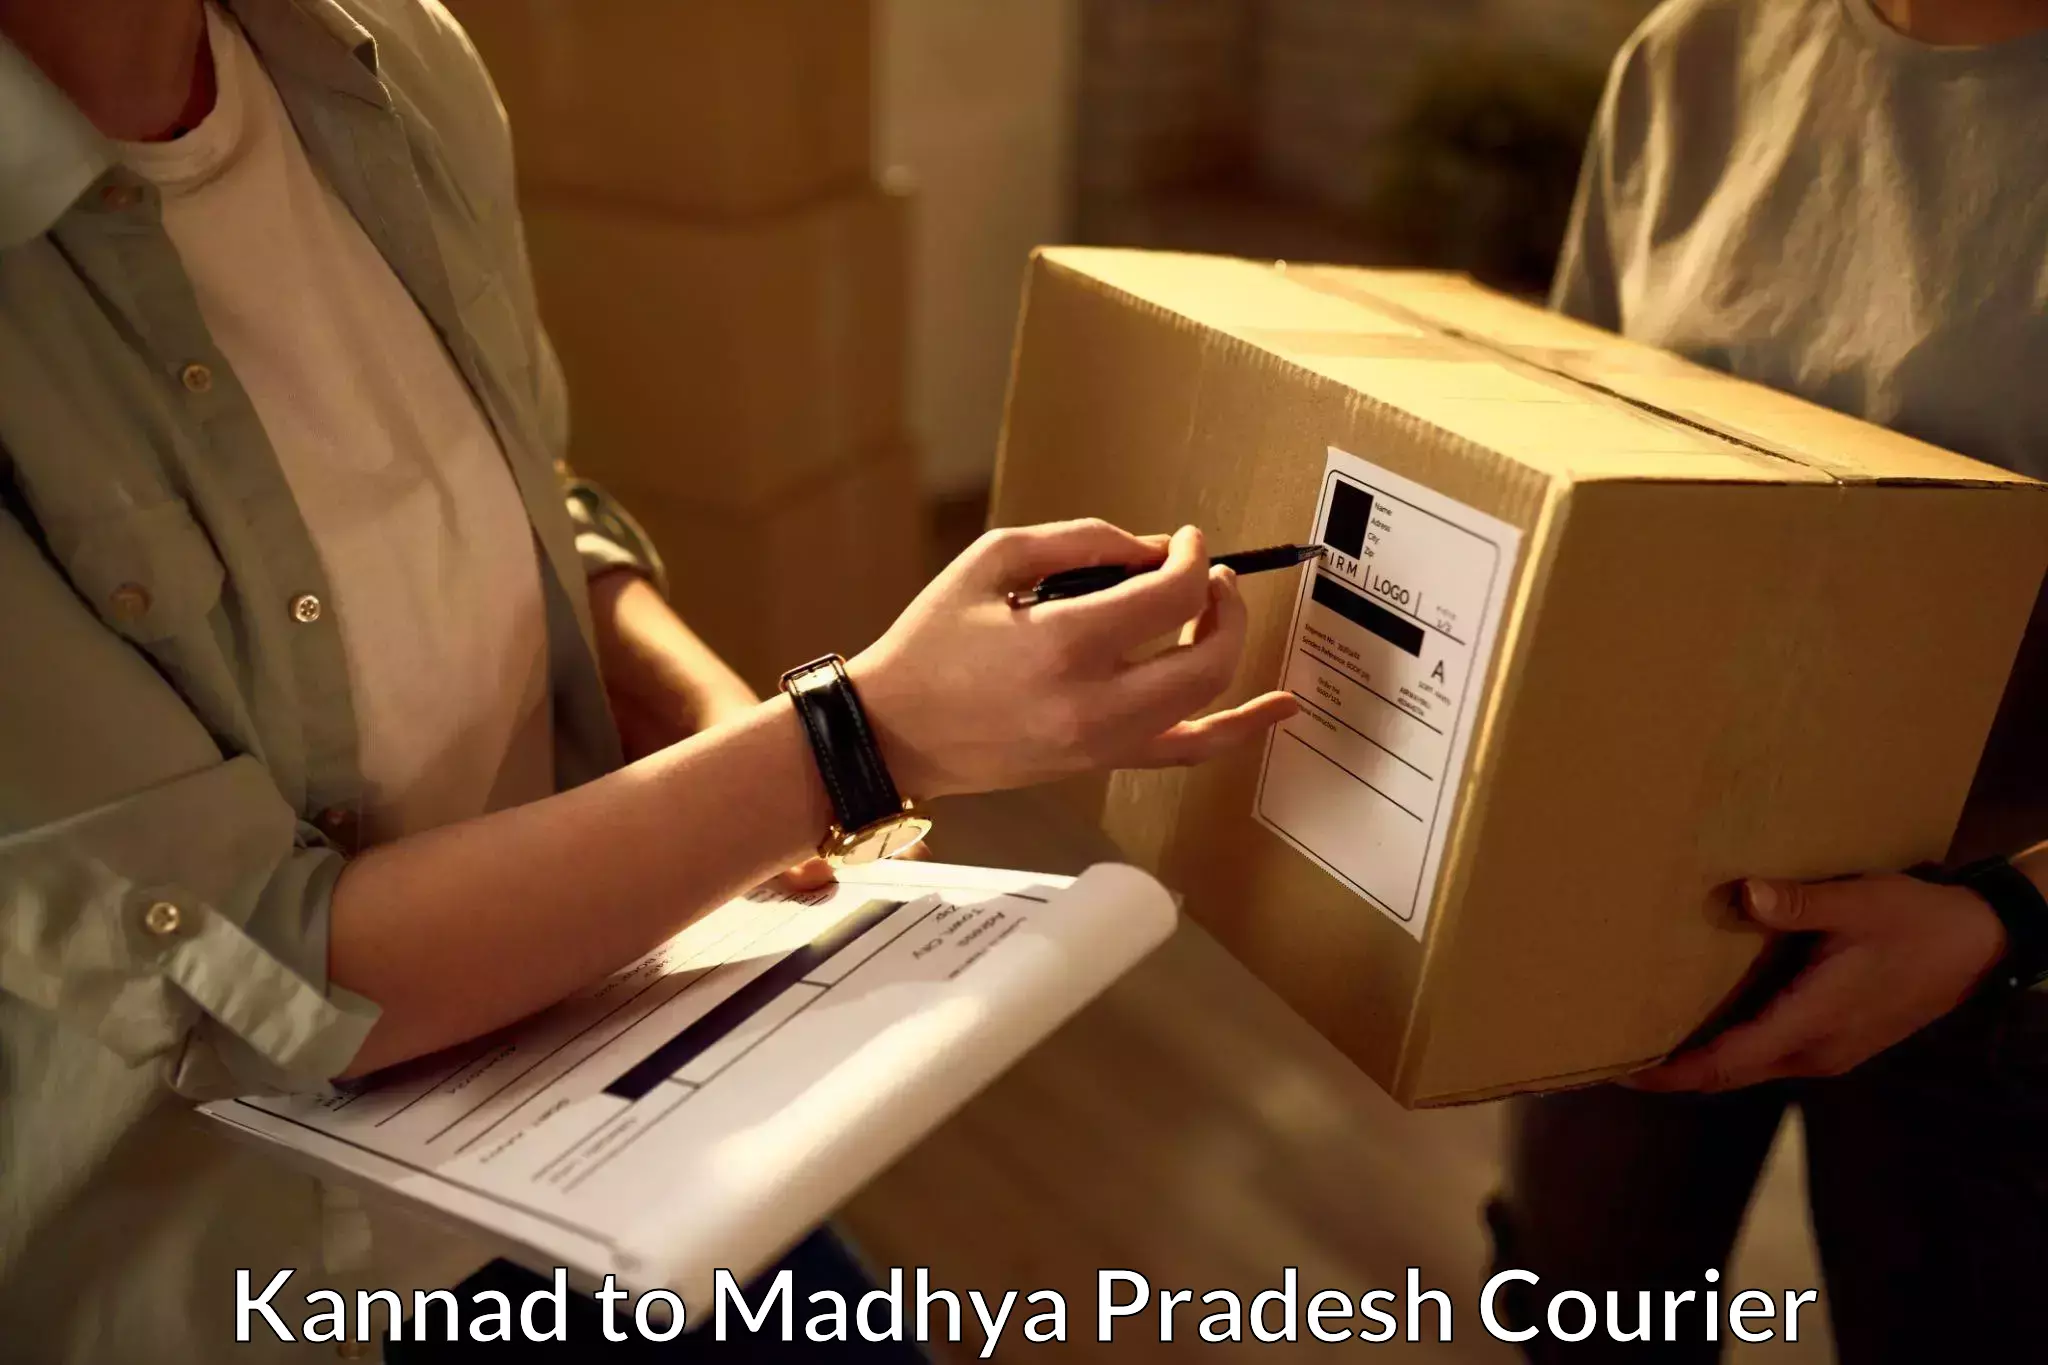 State-of-the-art courier technology Kannad to Sitamau